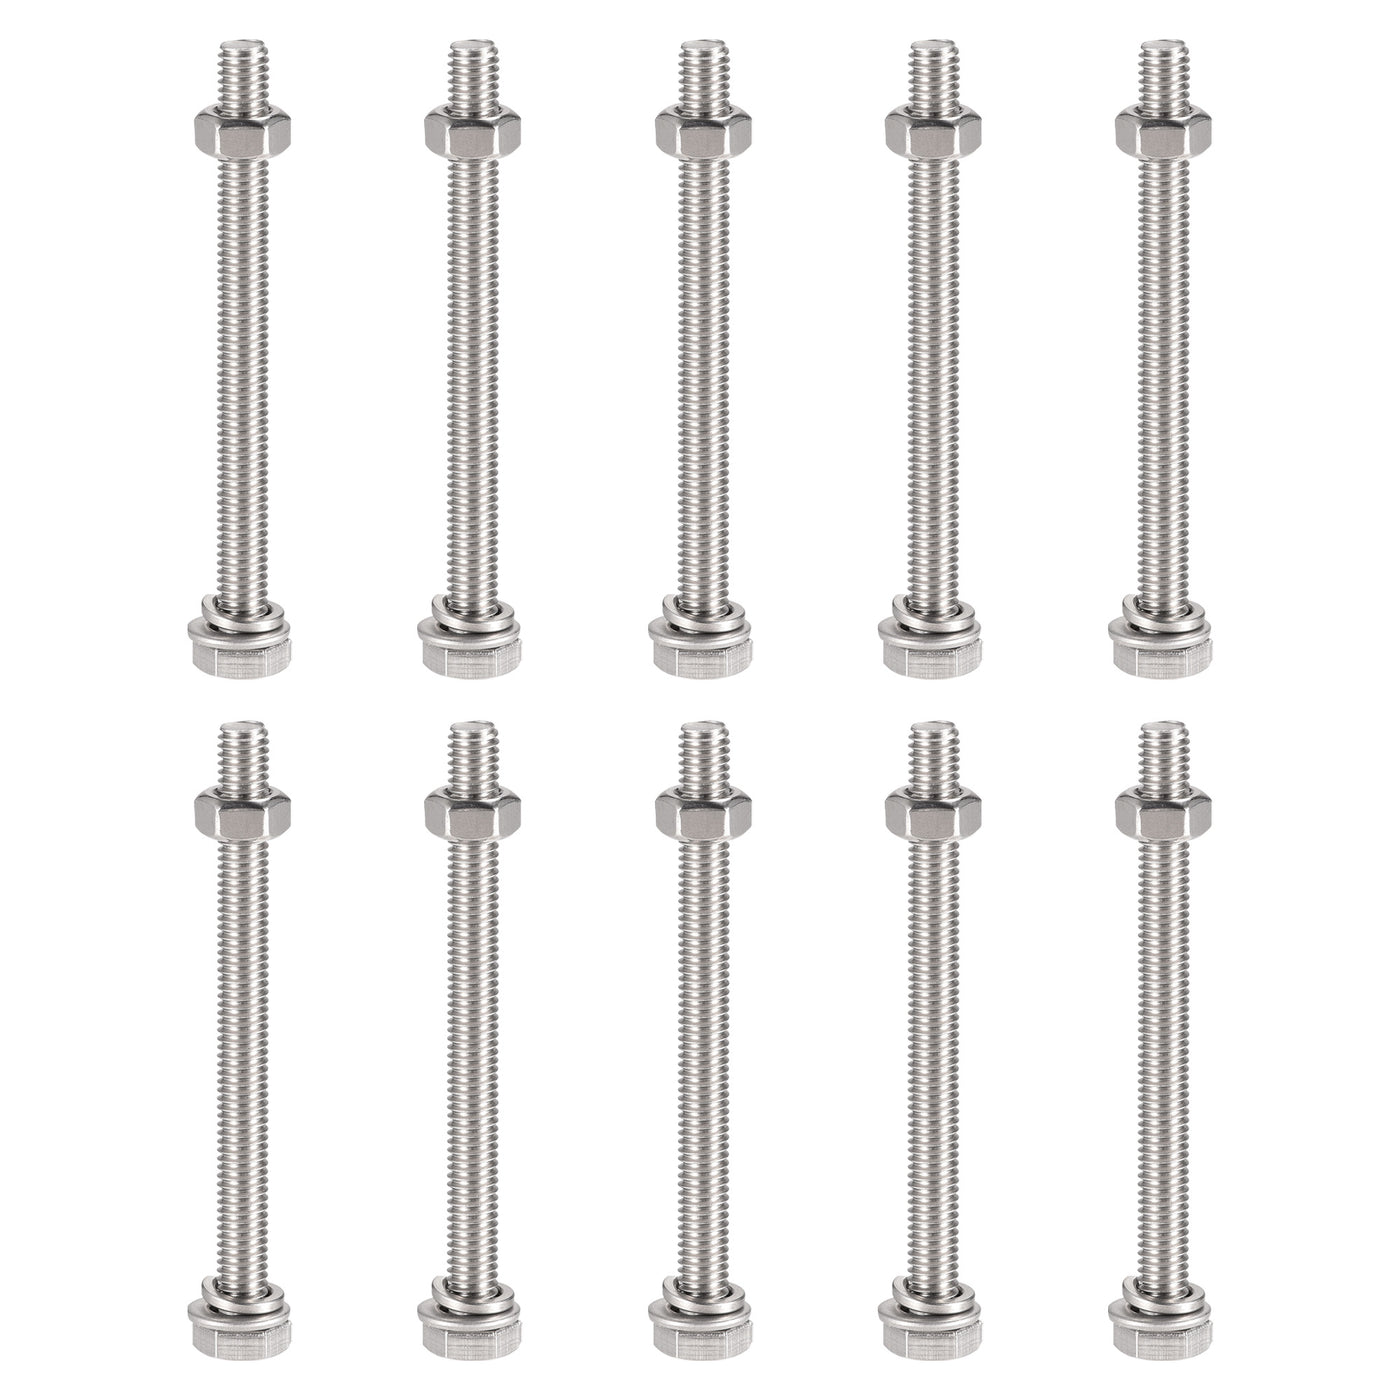 Uxcell Uxcell M6 x 80mm Hex Head Screws Bolts, Nuts, Flat & Lock Washers Kits, 304 Stainless Steel Fully Thread Hexagon Bolts 10 Sets